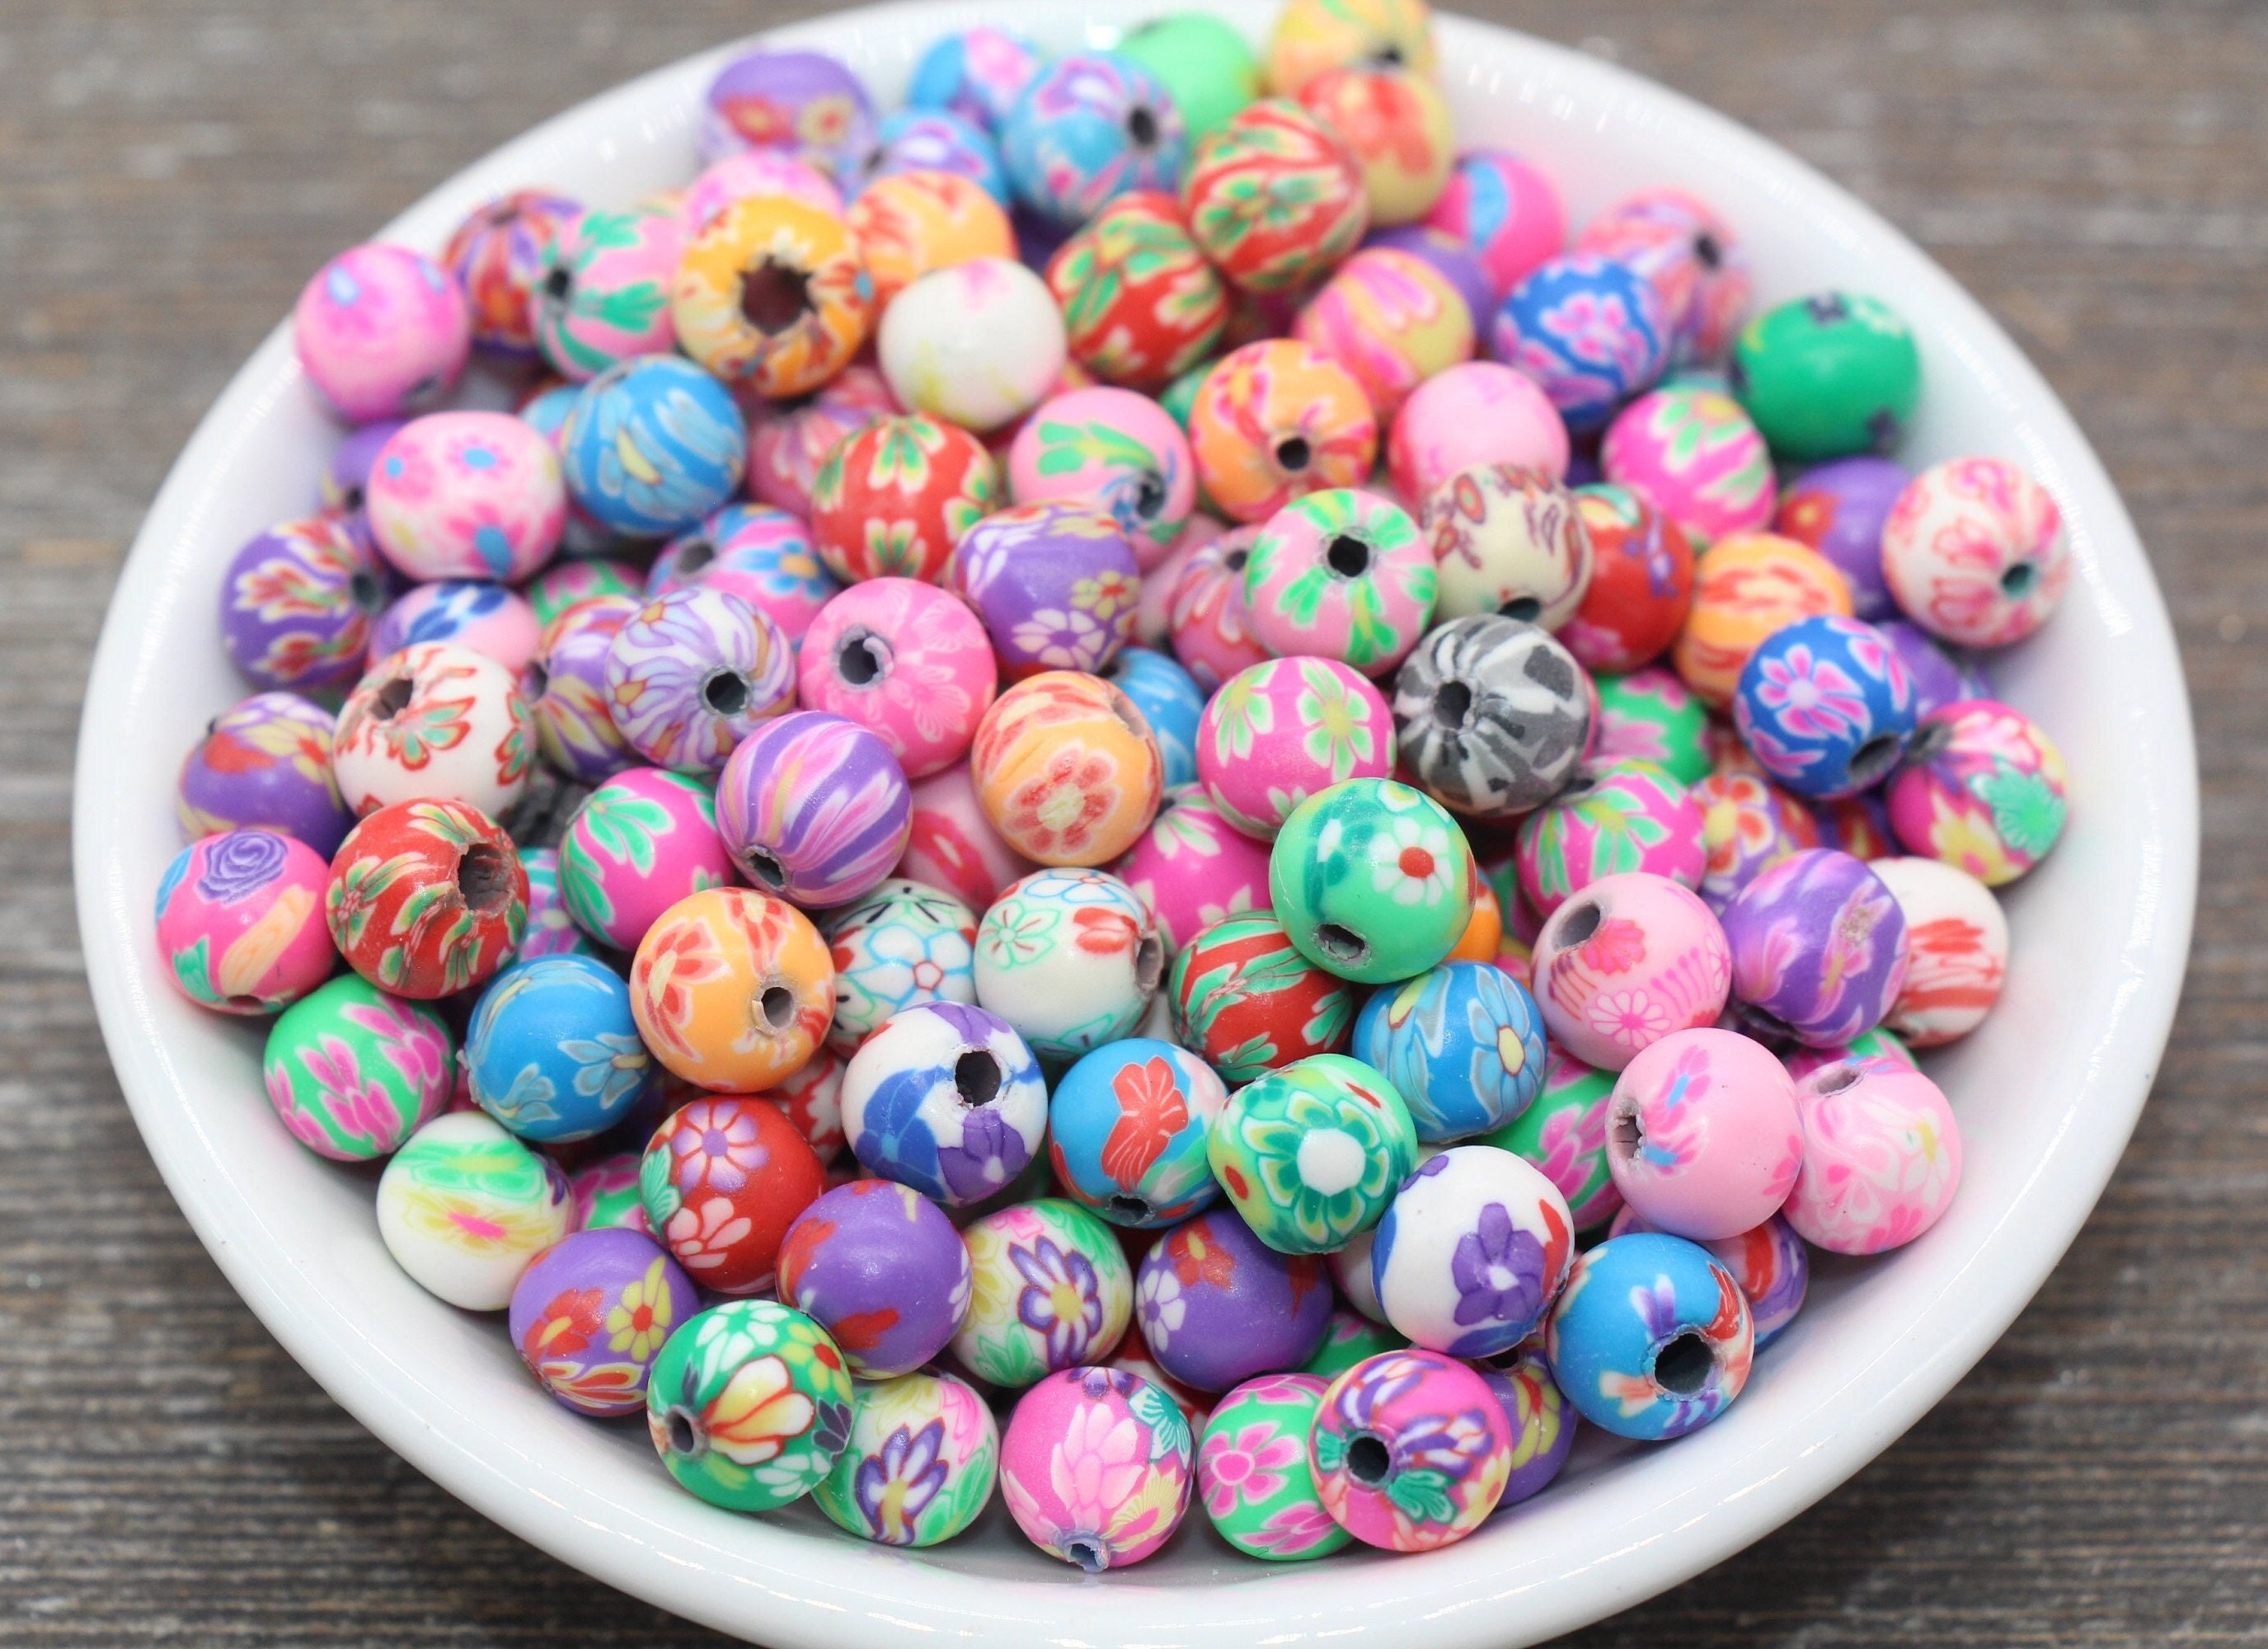  HERZWILD Flower Polymer Clay Beads Mixed Colorful Flower  Handmade Soft Beads Cute Flower Beads Charms for Bracelets Jewelry Necklace  Earring Making with Elastic String (flower2)